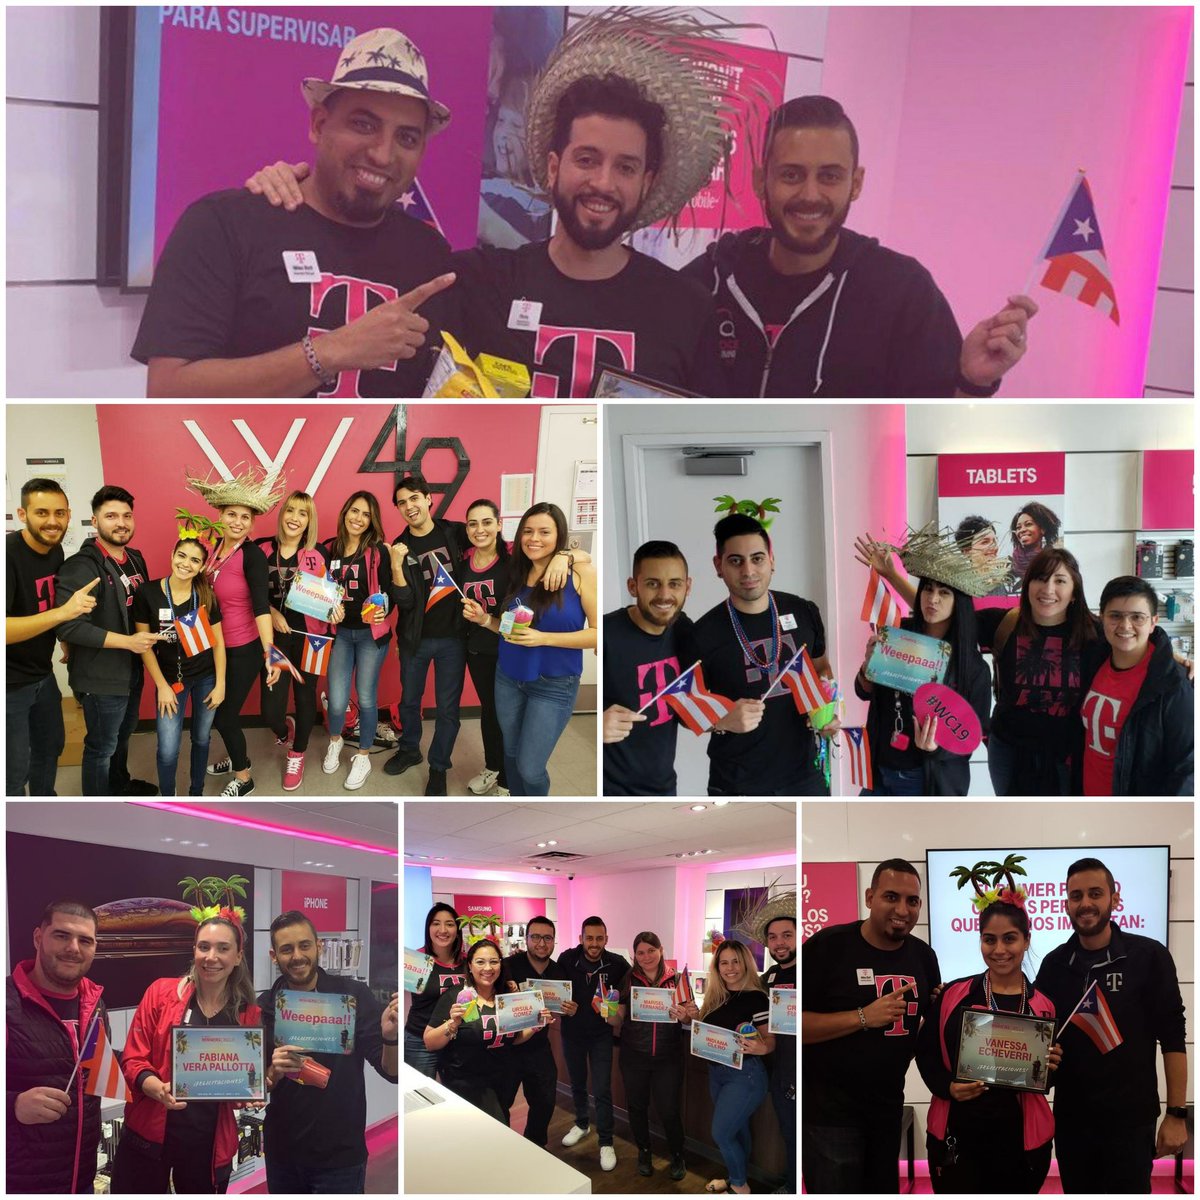 #WC19 #MiamiCentralWC19 #Doral41st What a year it has been. Super proud to show off Miami Central and Doral 41st connection with Winners Circle. Sending 8 amazing people to celebrate this time. @NicholasMusarra @RJGomezIII @pattyc101 @DiegoLazoo_ @vbarros0919 @Indy_Clero